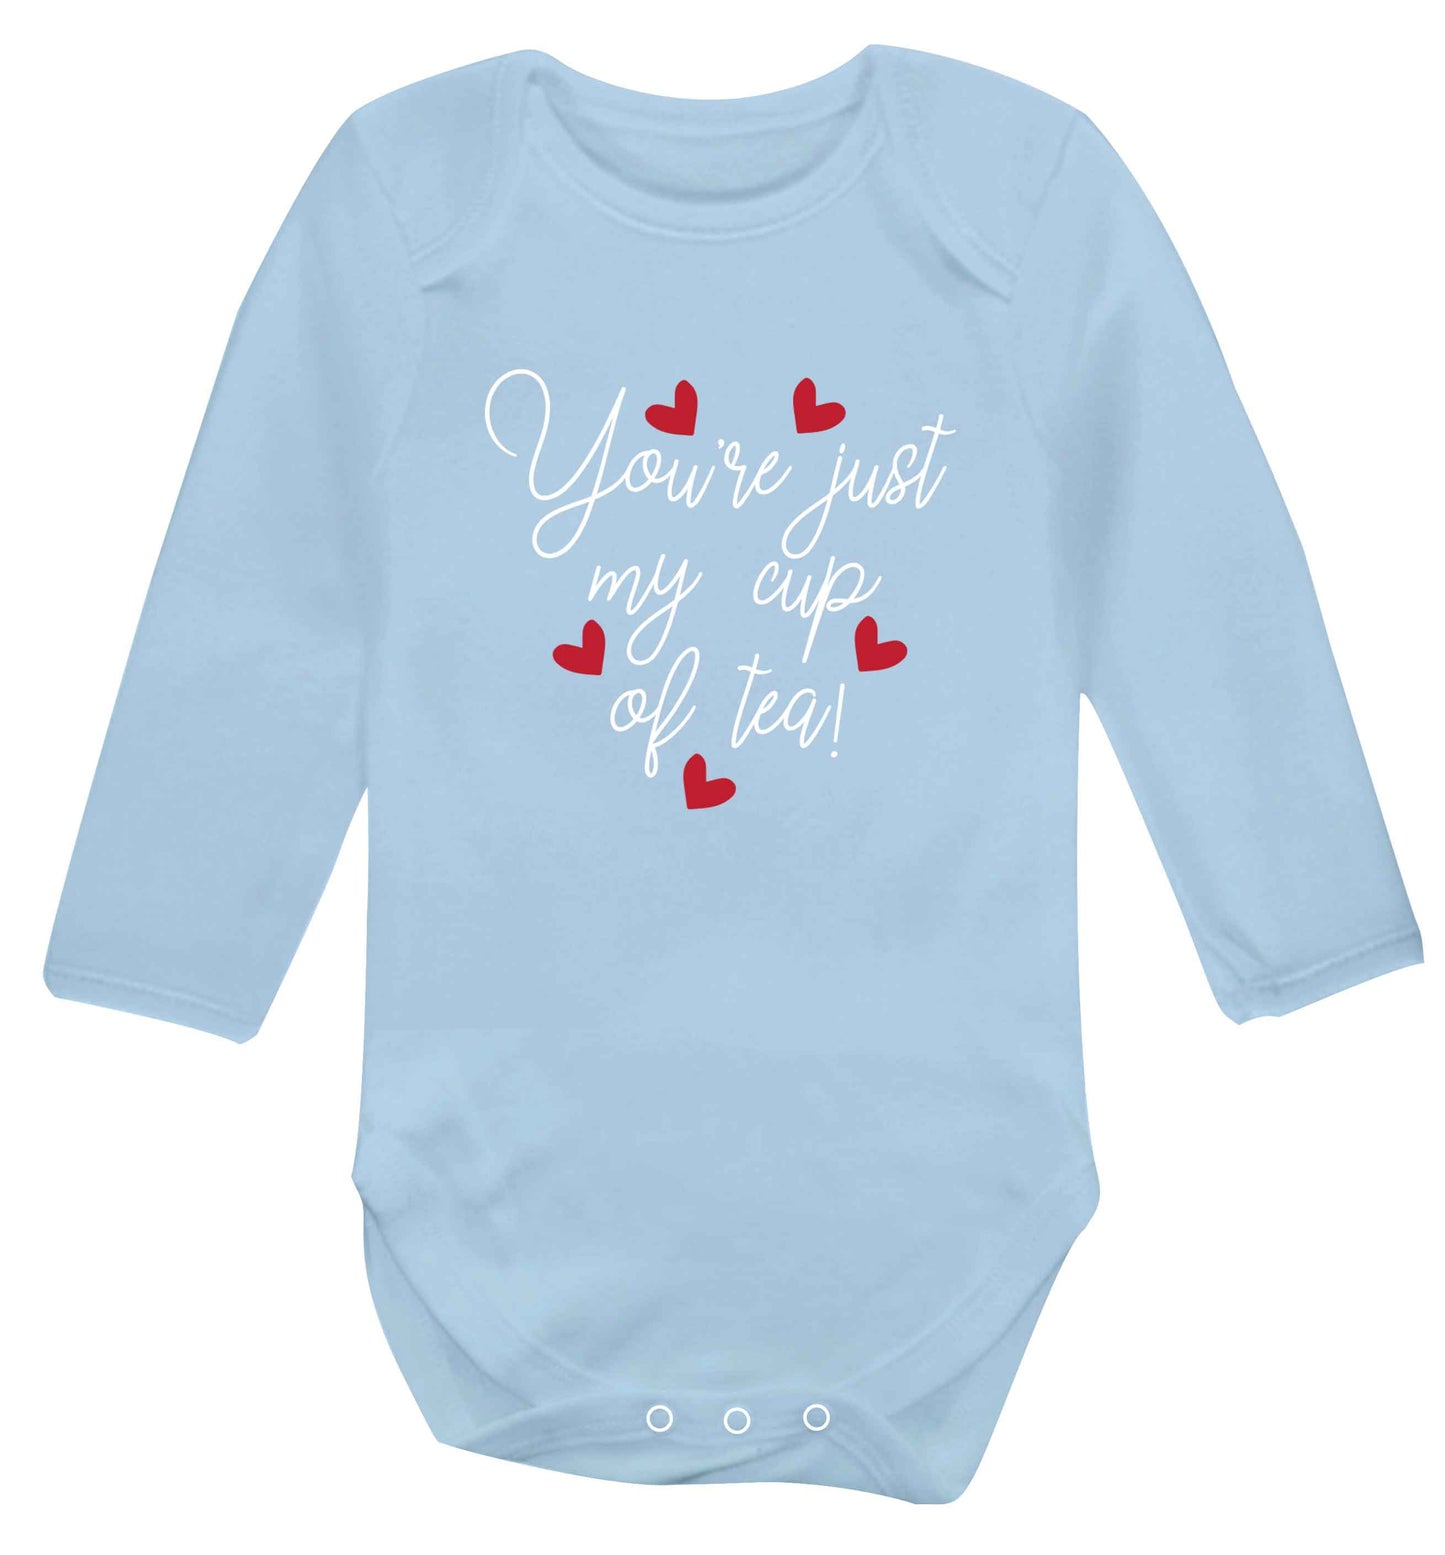 You're just my cup of tea baby vest long sleeved pale blue 6-12 months